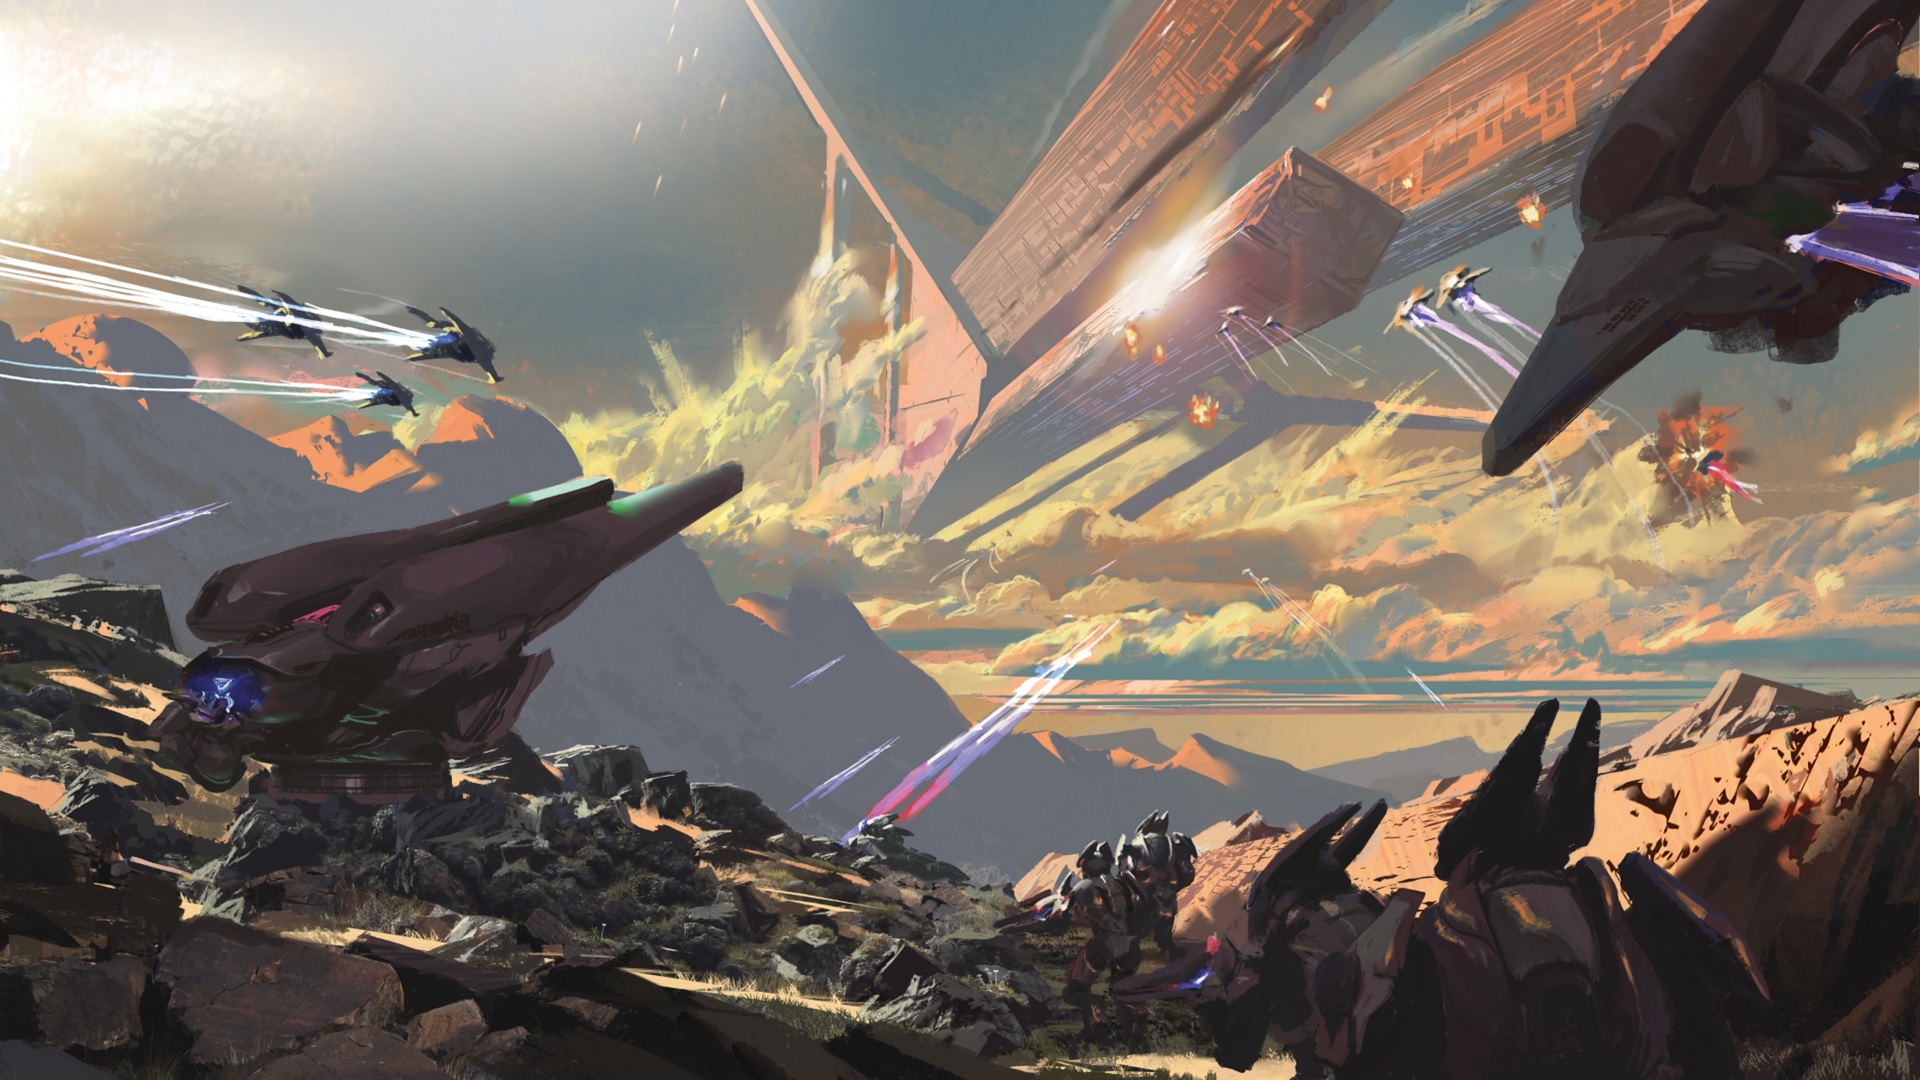 Halo Mythos art by David Heidhoff showing the War of Beginnings between the Sangheili and San'Shyuum on the world of Ulgethon